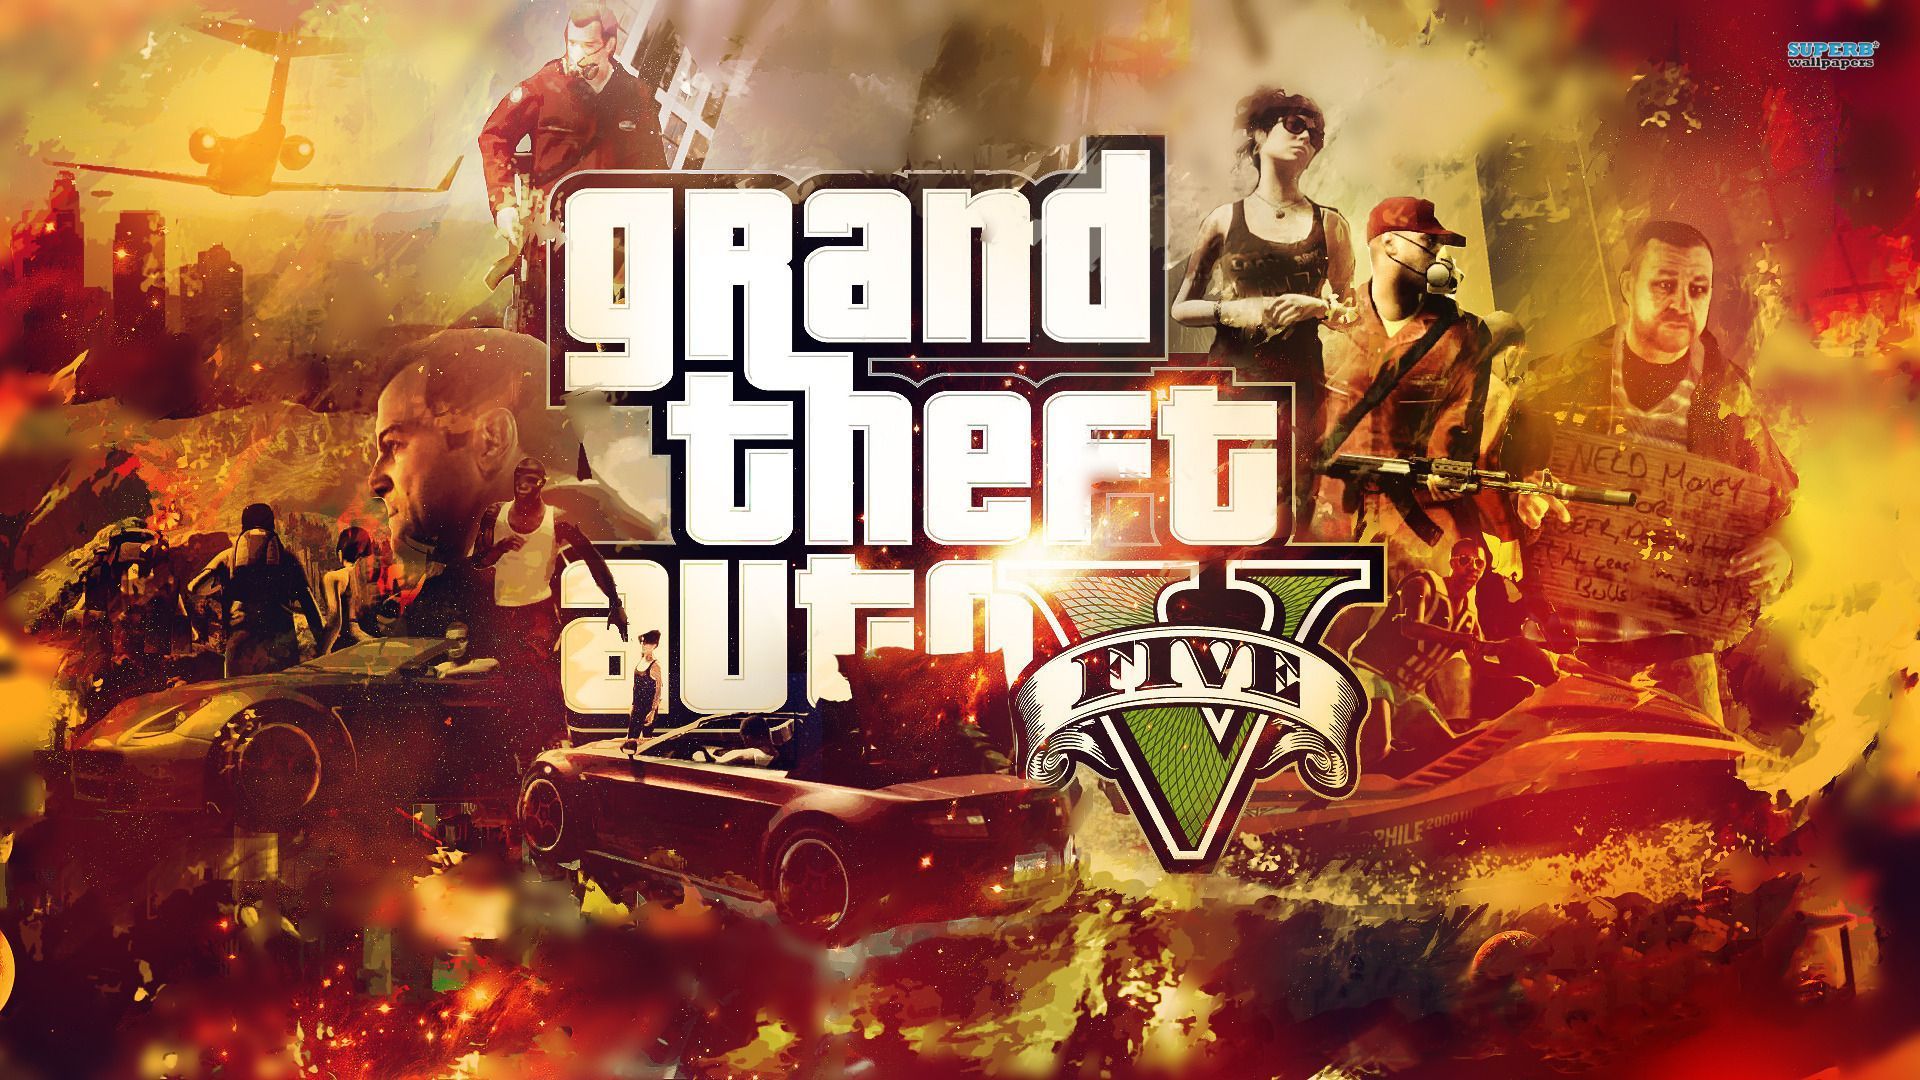 GTA 5 Game Hd Wallpapers | Onlybackground